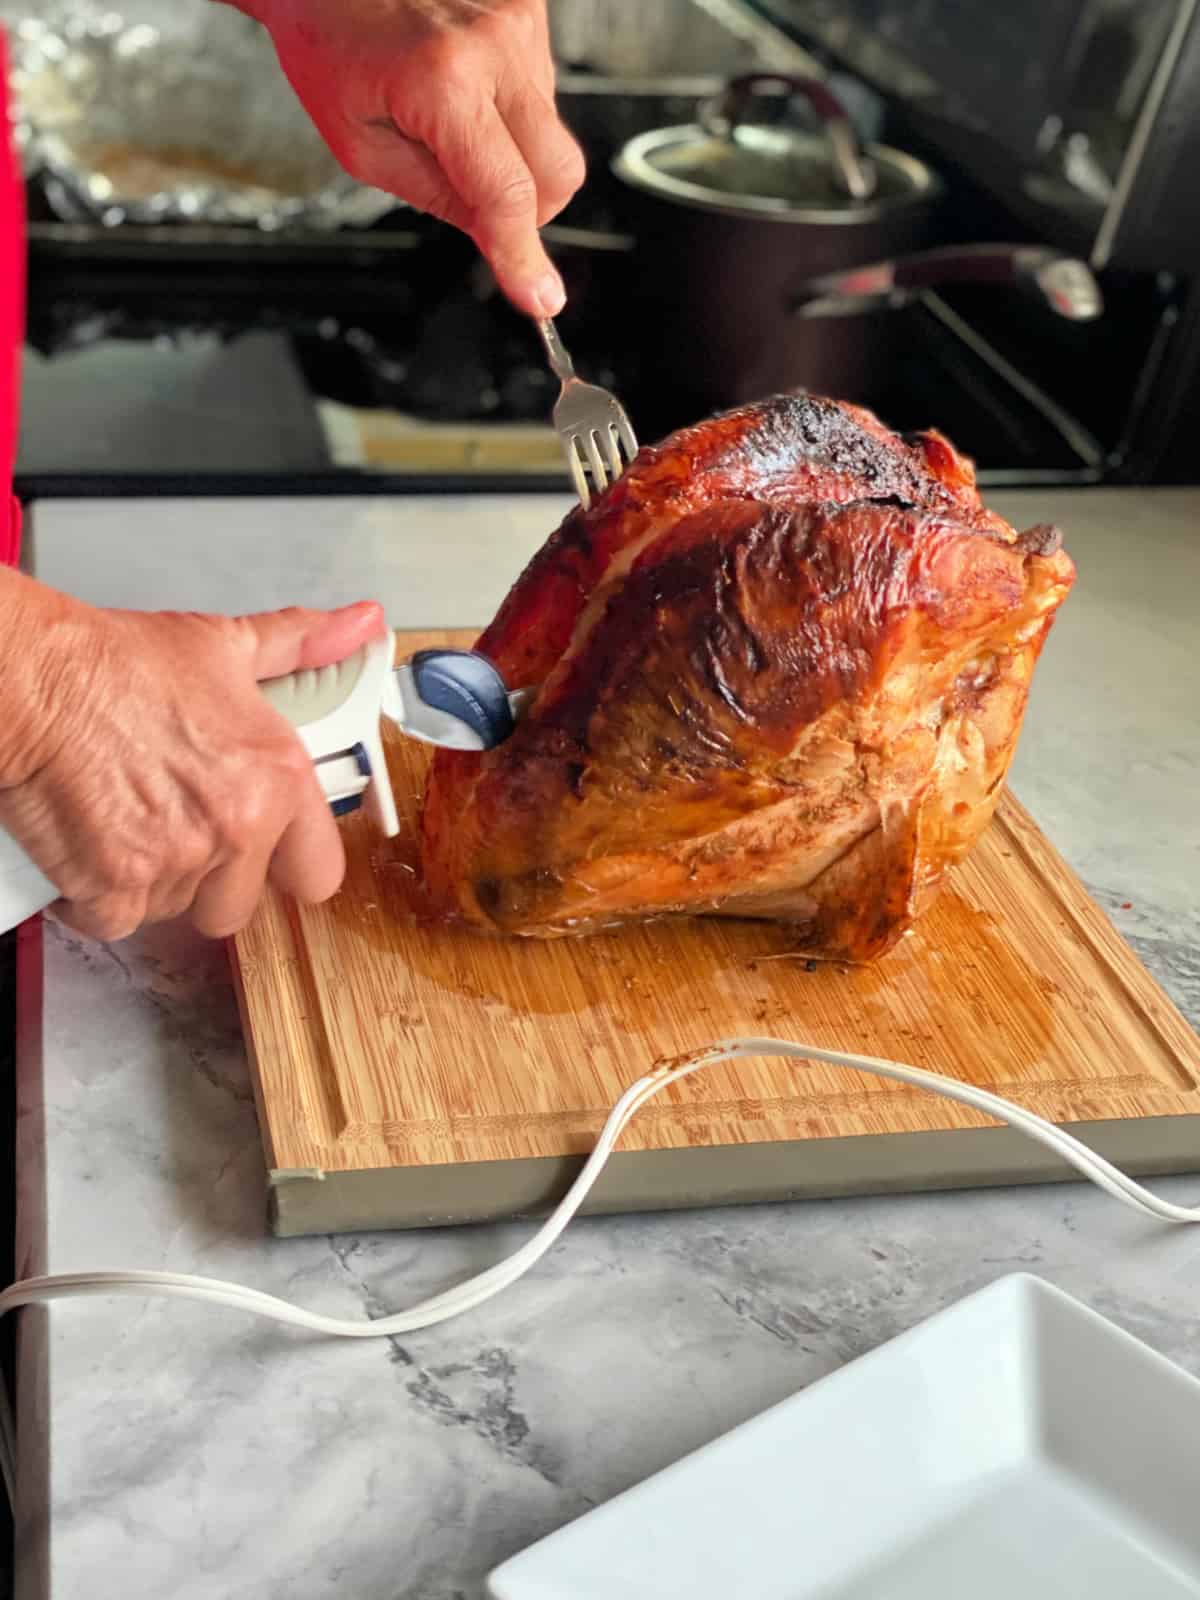 Female hand carving a full browned turkey breast on a wooden cutting board.